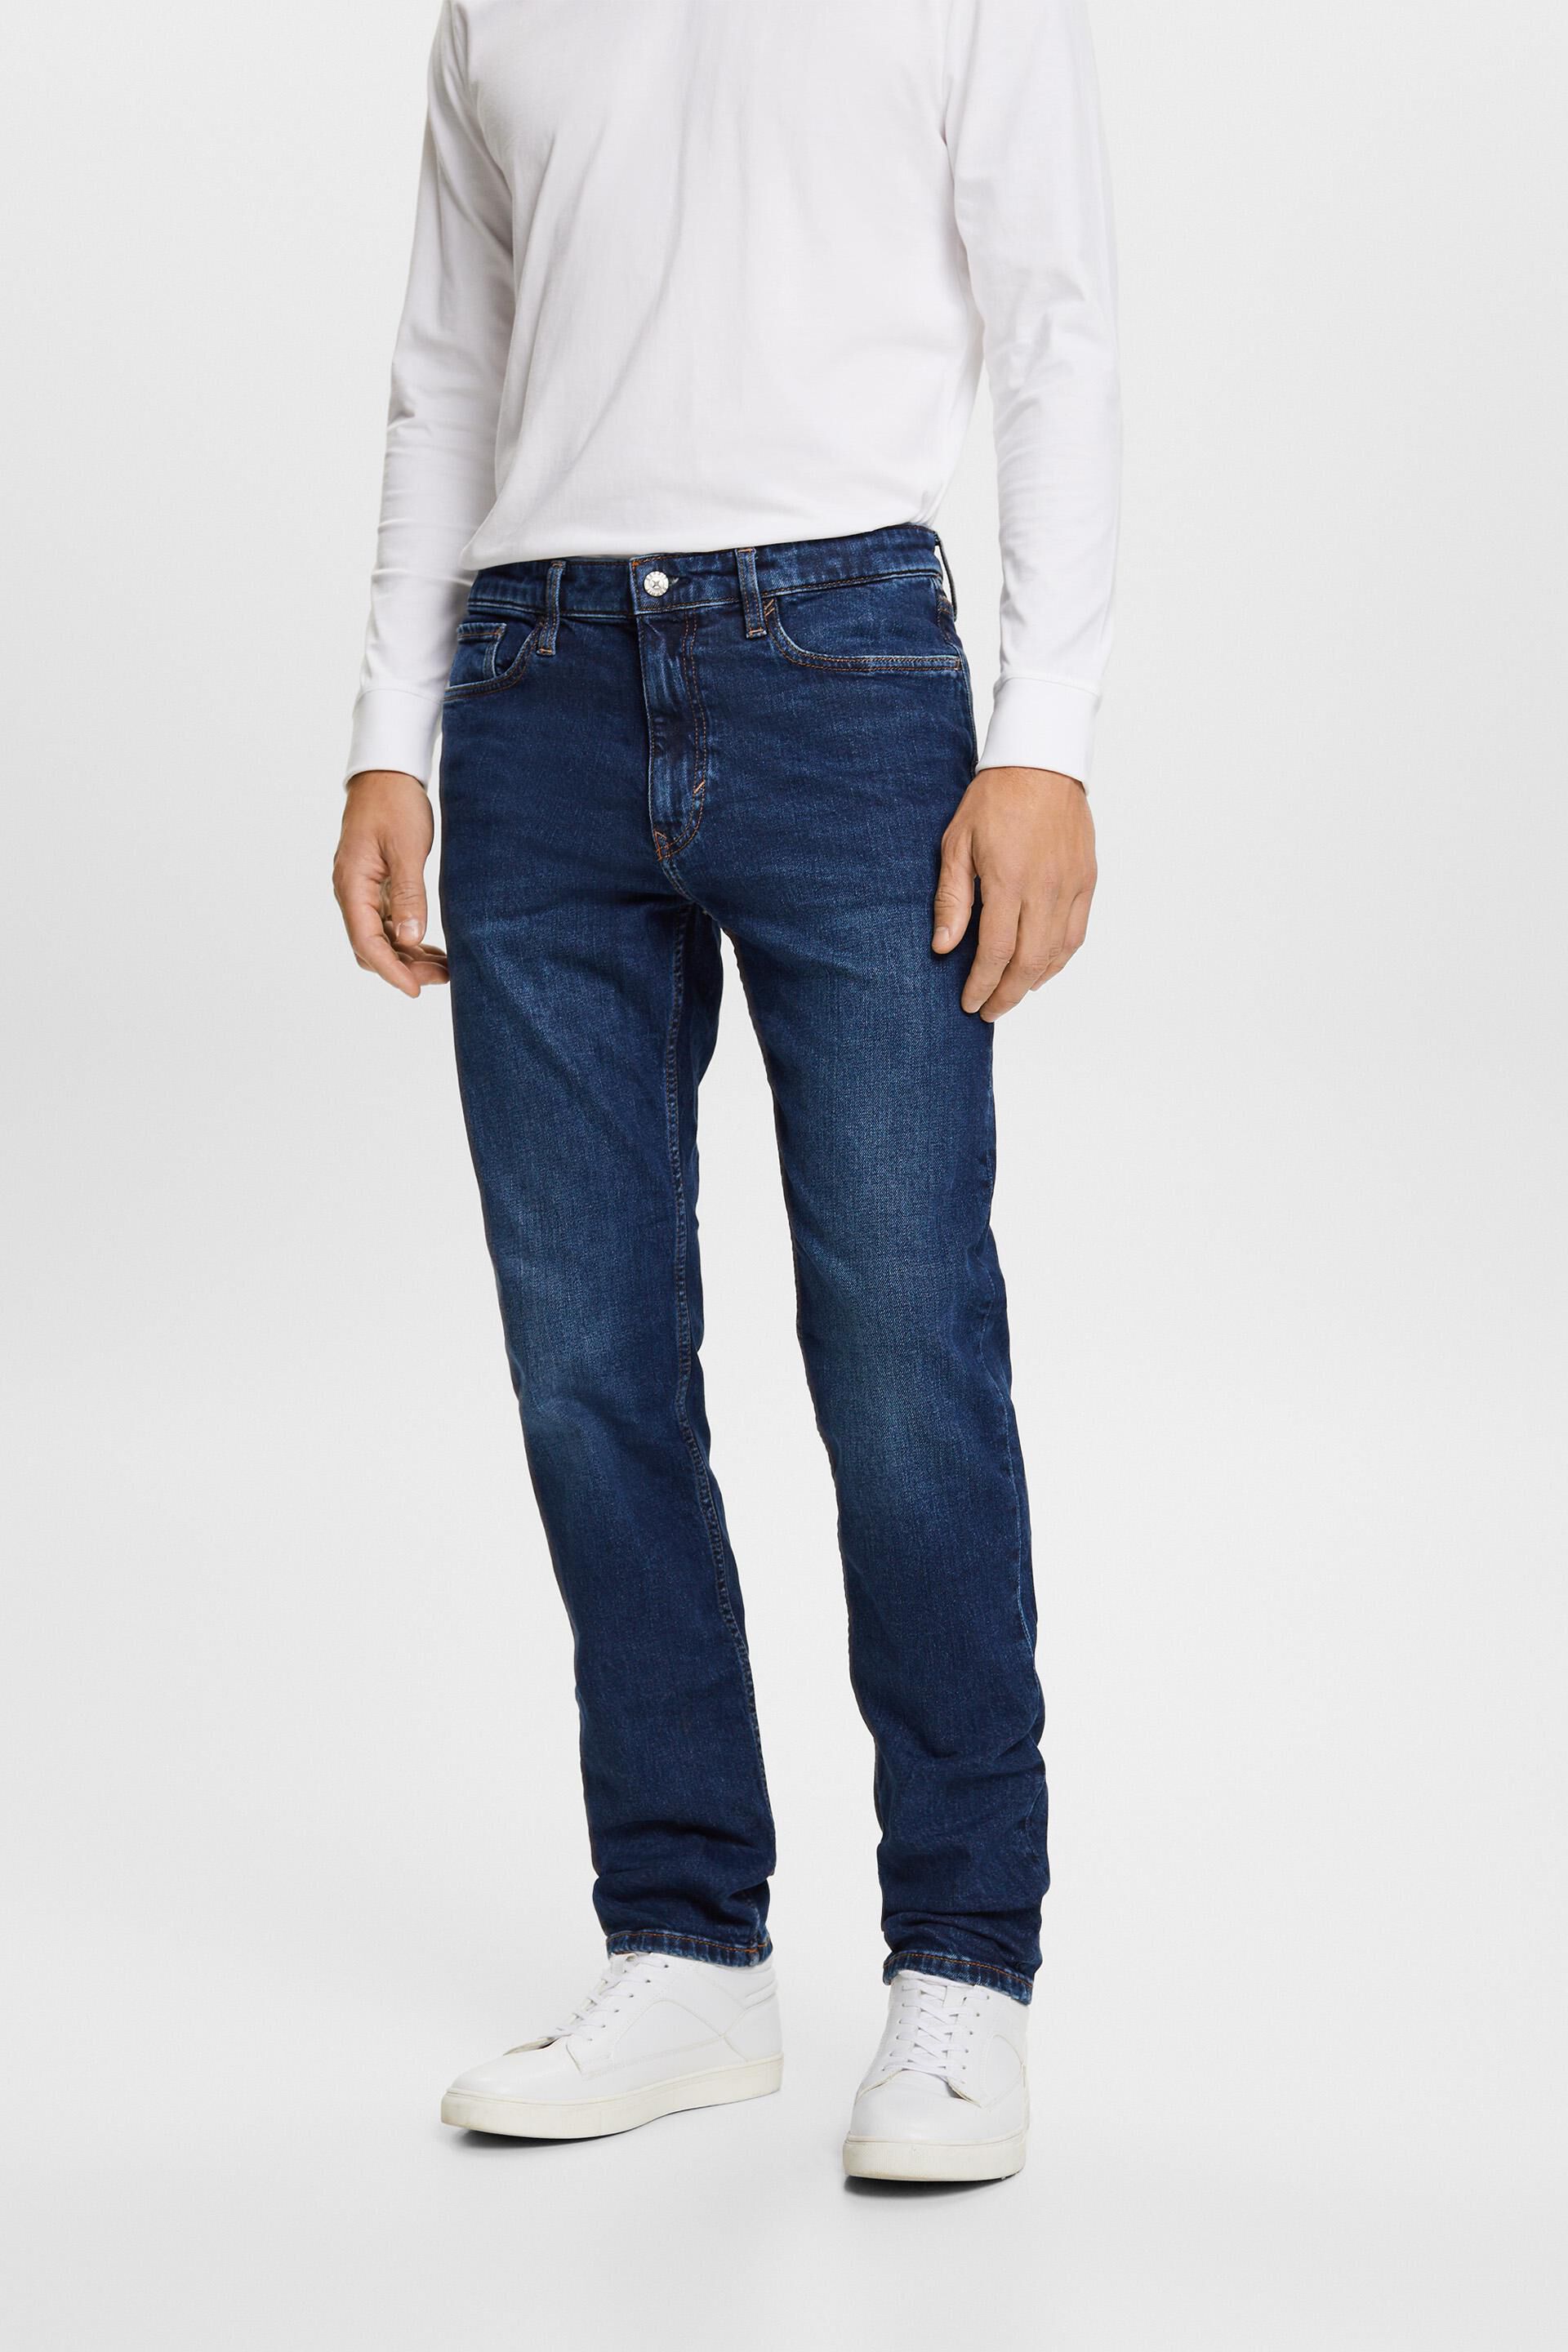 Esprit jeans straight Recycled: fit